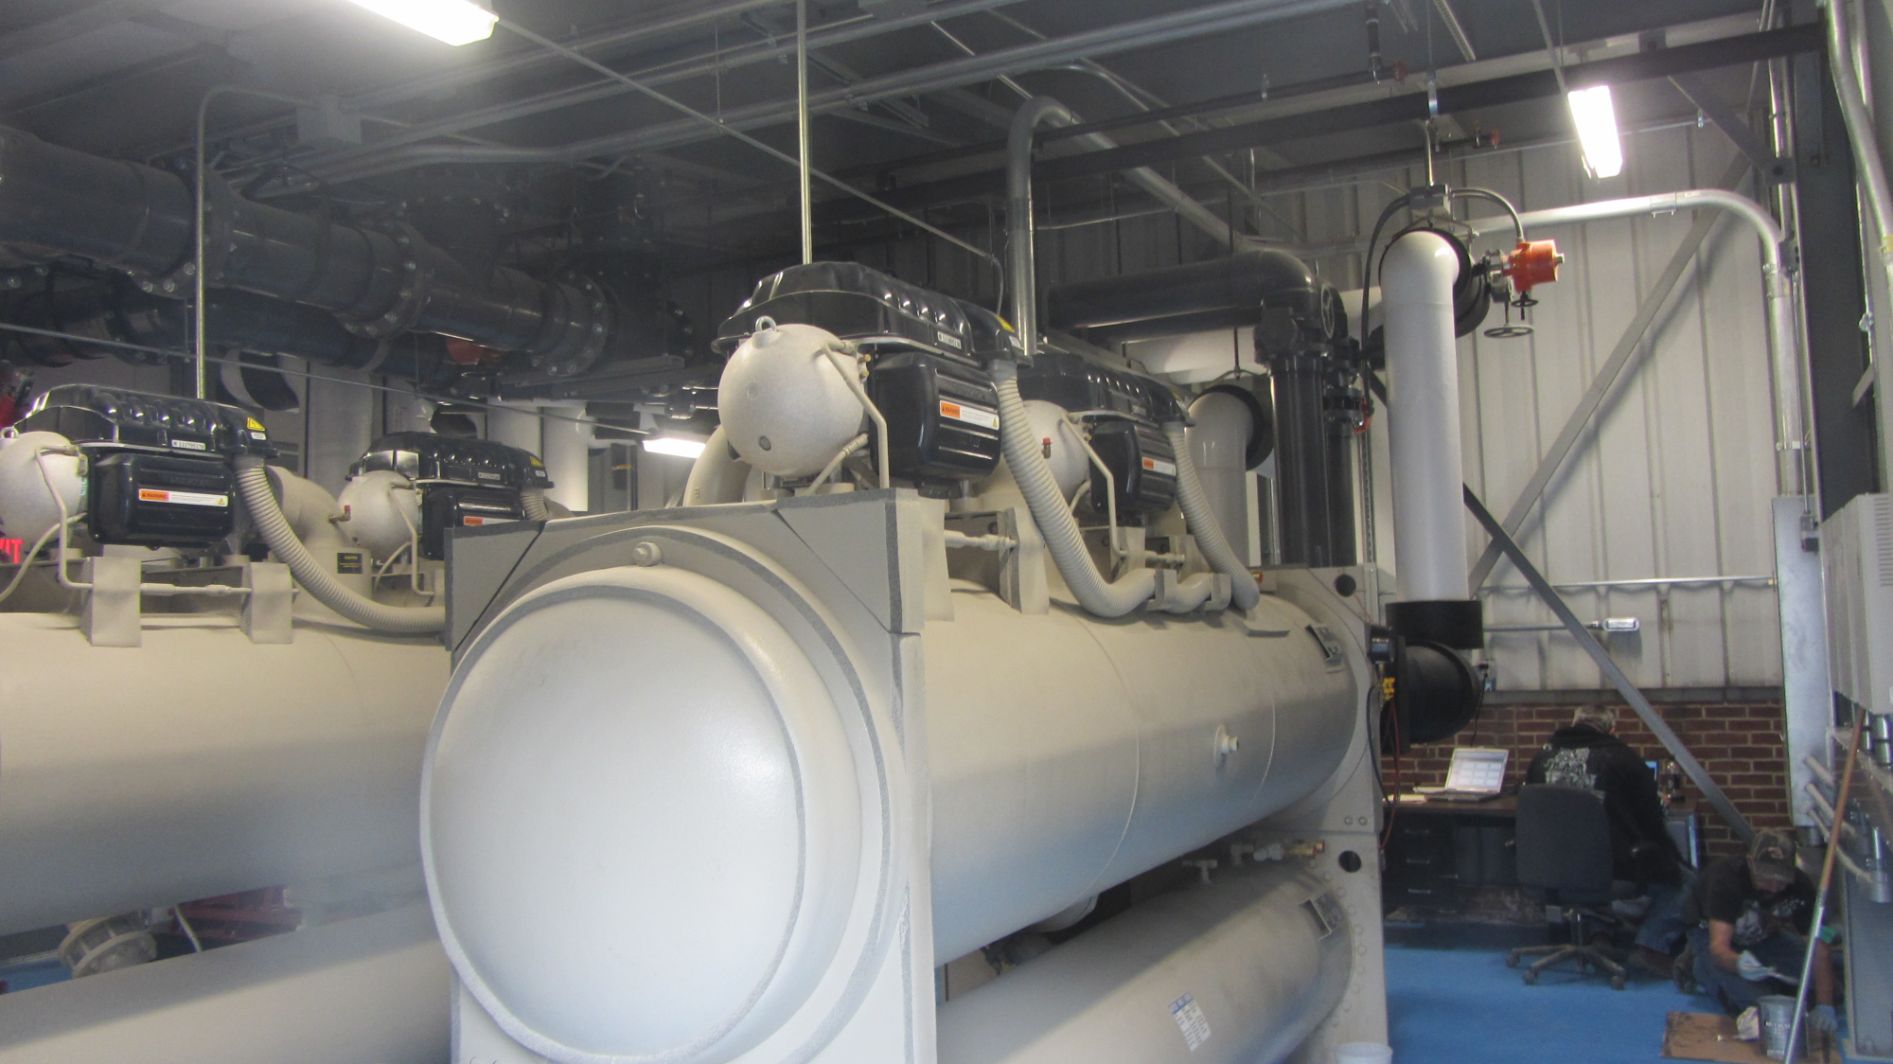 A large white machine in a room with pipes.